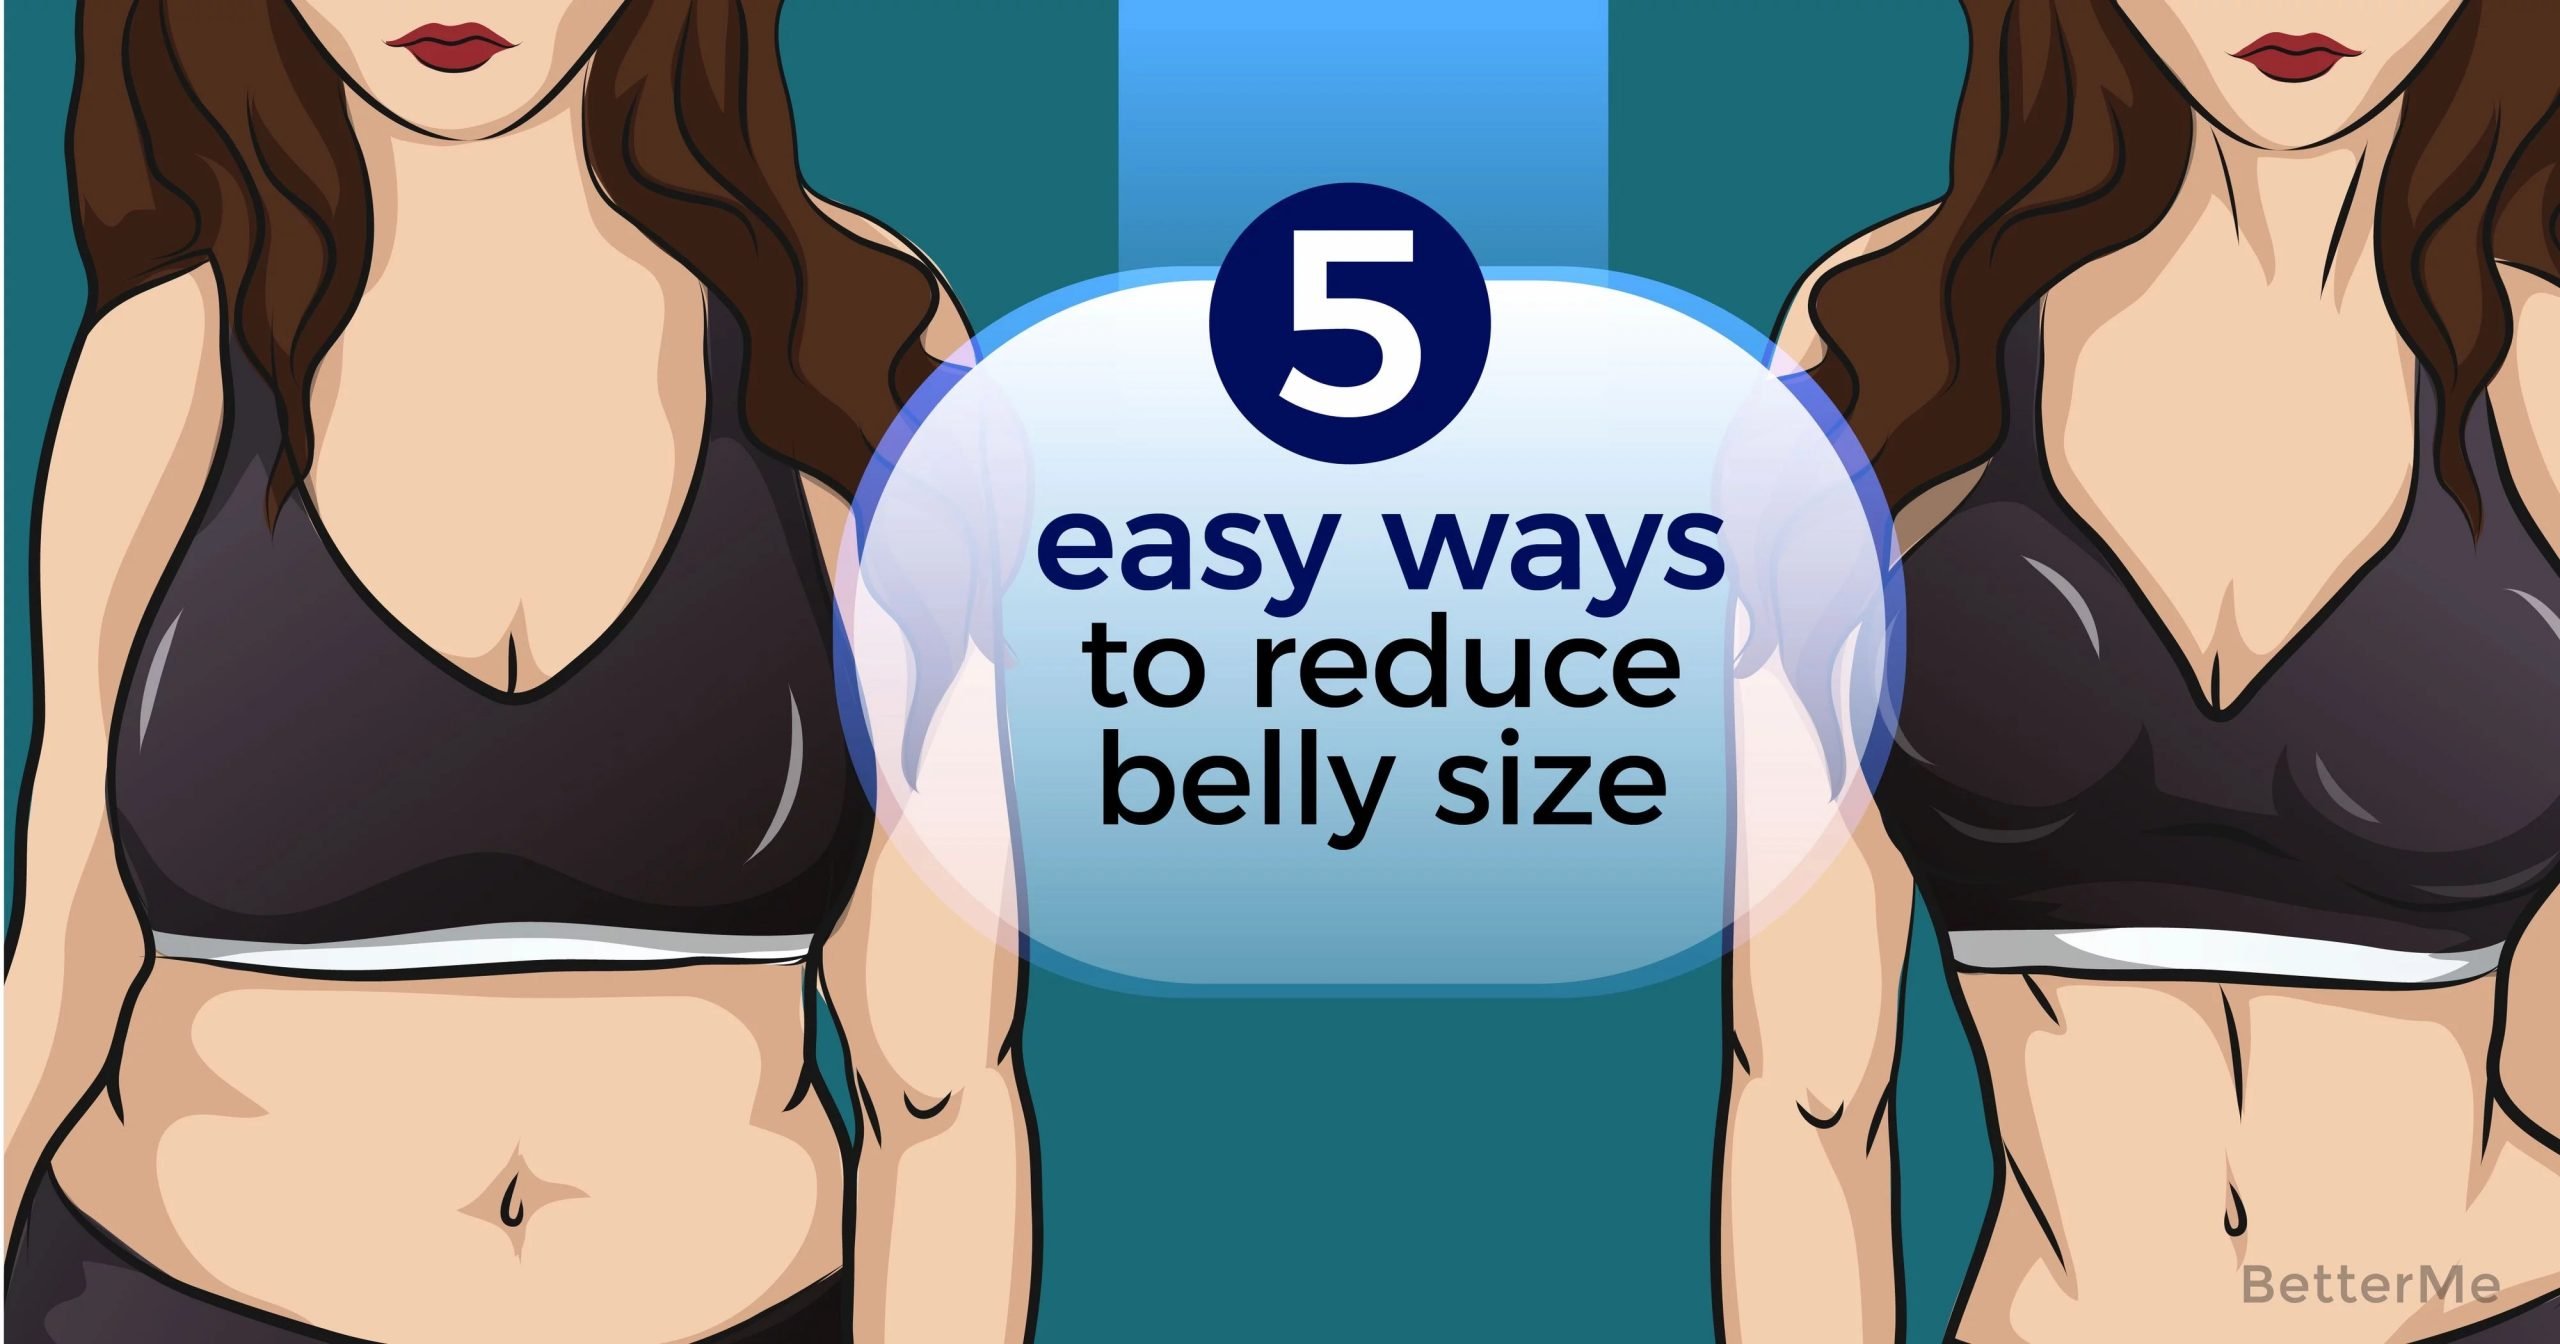 5 easy ways to reduce belly size